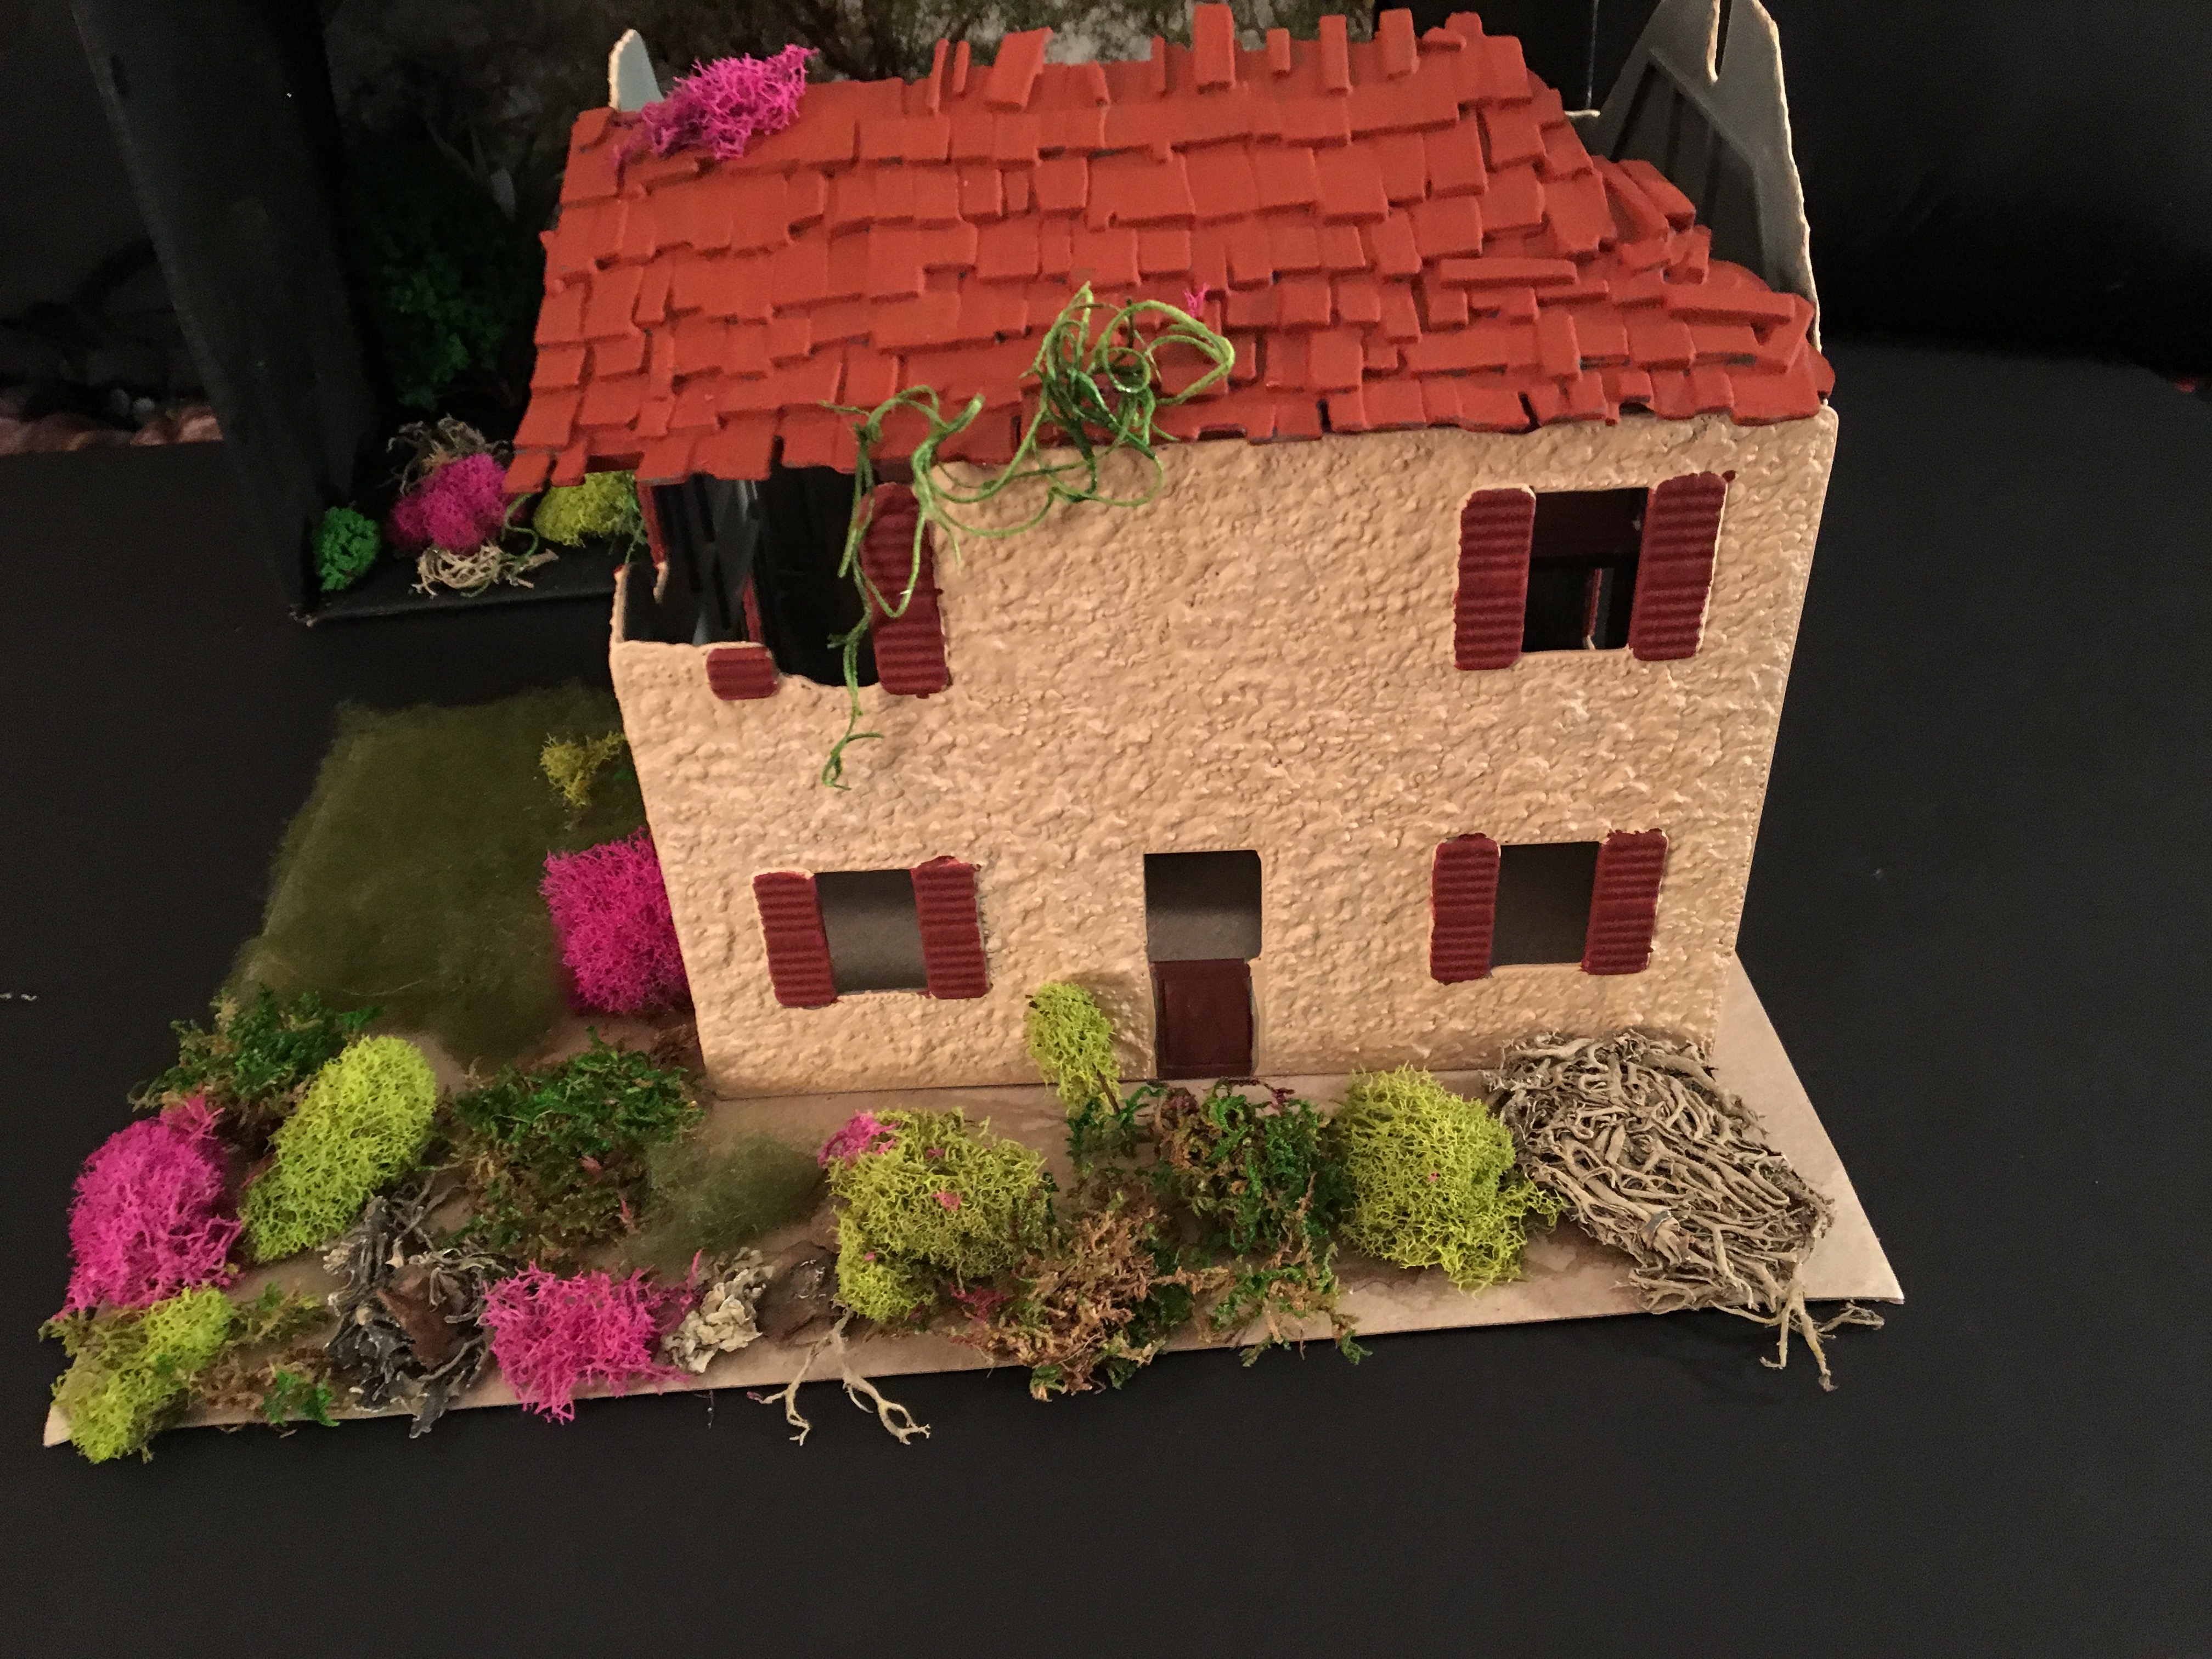 Tabletop model of a dilapidated stucco two-story house